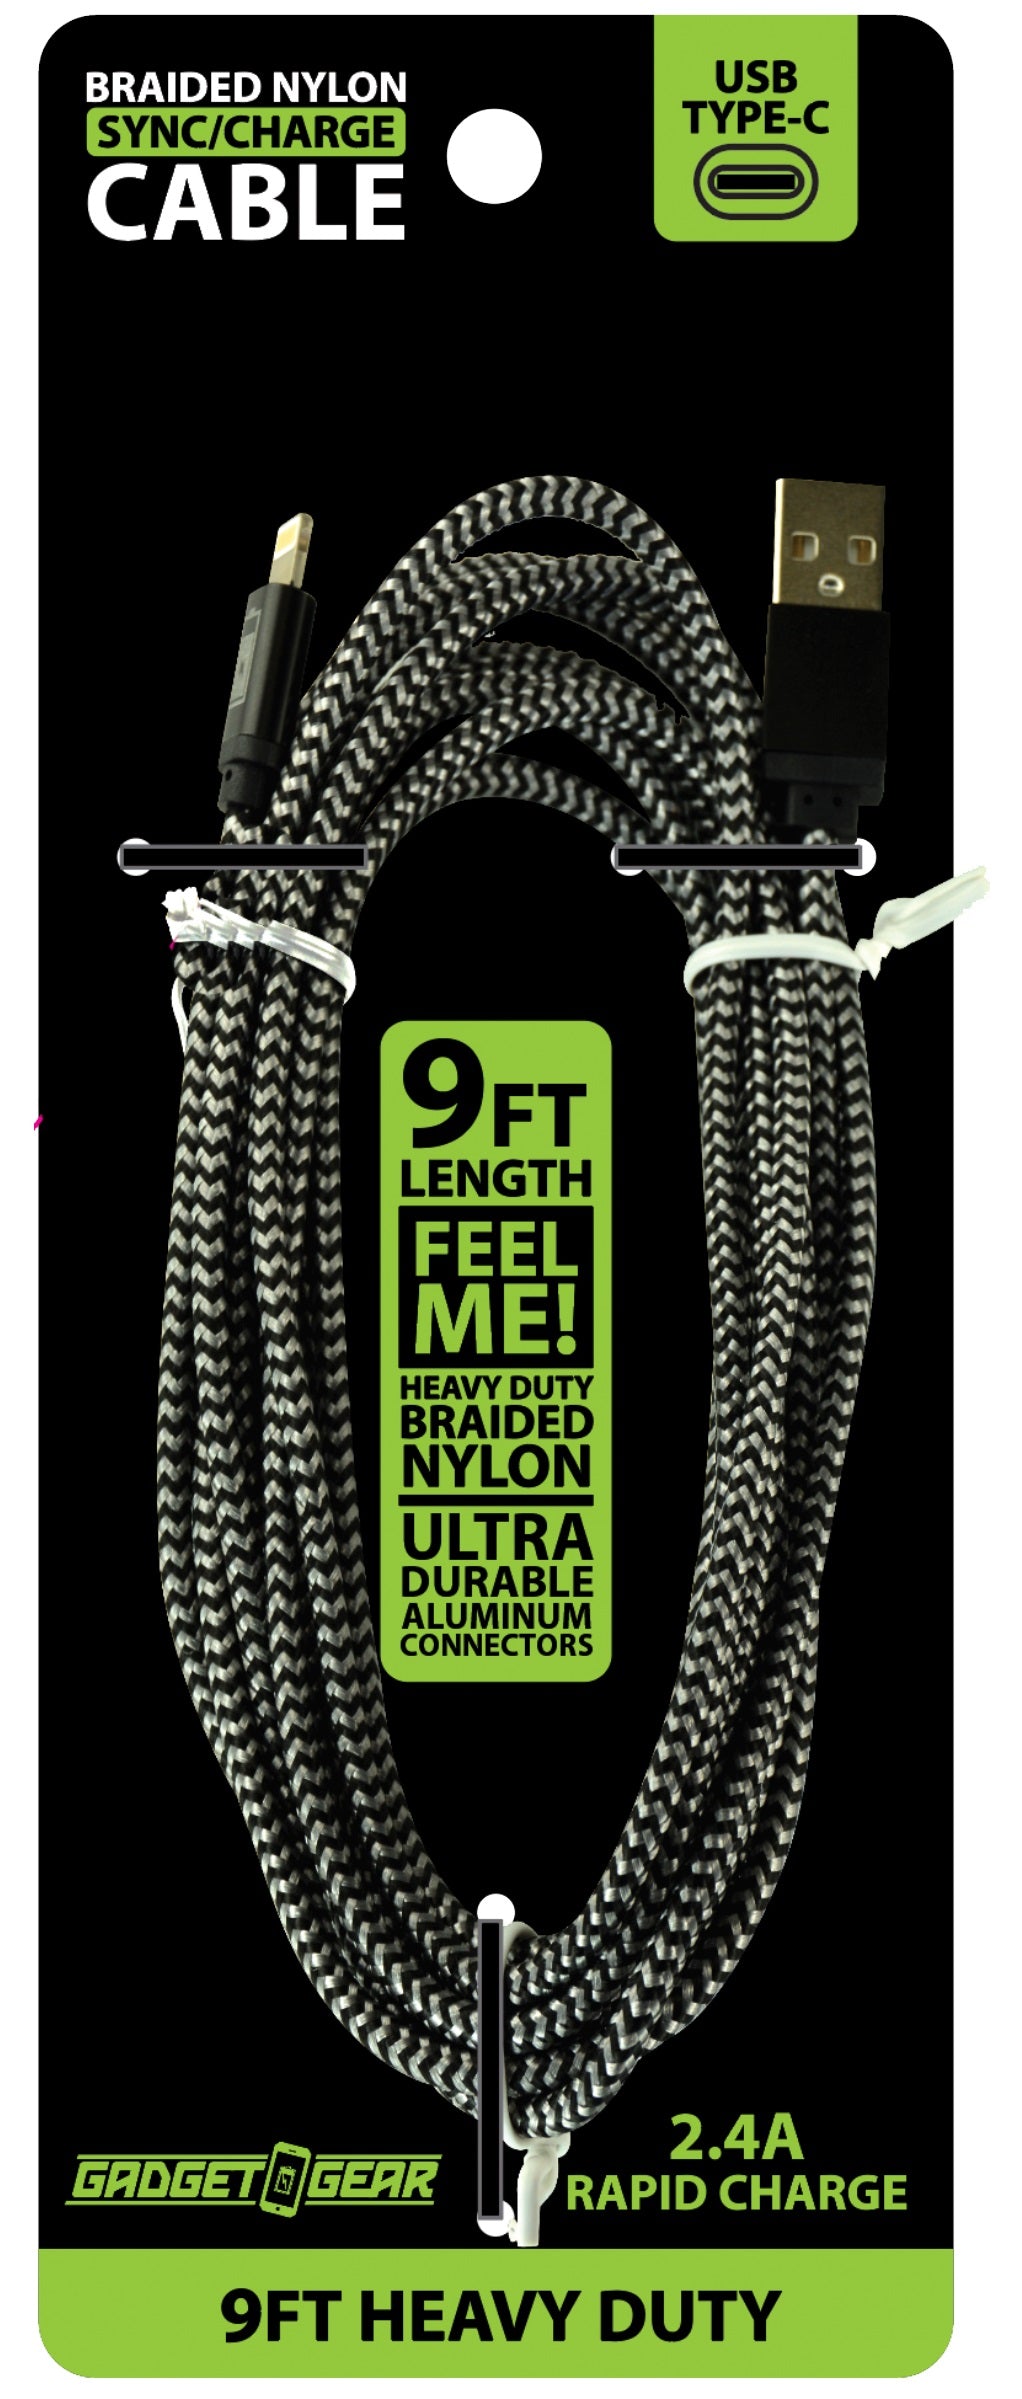 ITEM NUMBER 022661L 9FT CLOTH CABLE TYPE C 16.99 - STORE SURPLUS NO DISPLAY 6 PIECES PER PACK